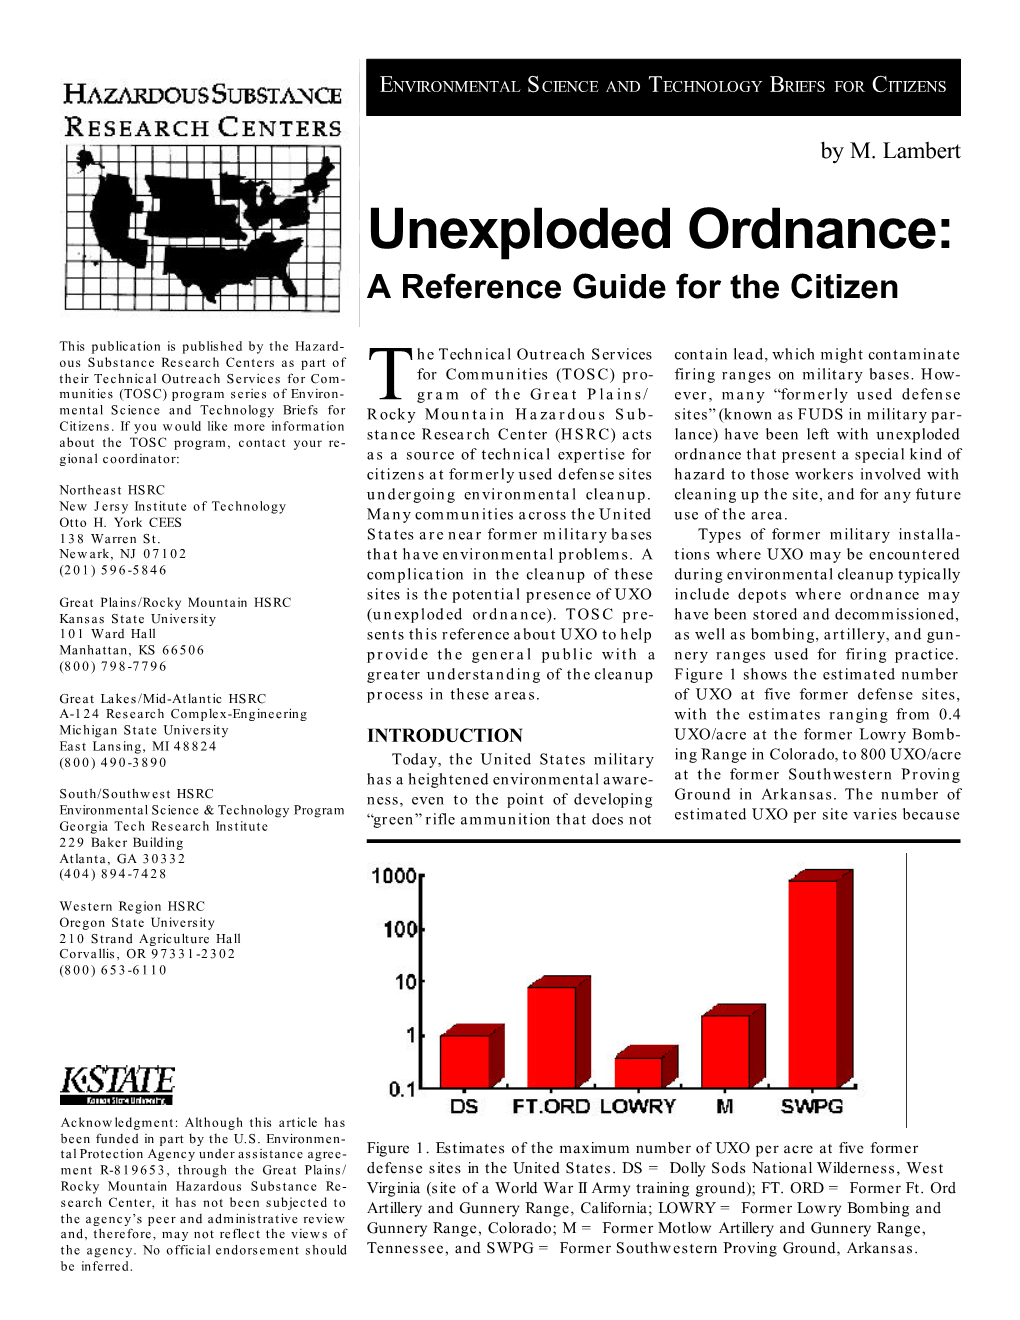 Unexploded Ordnance: a Reference Guide for the Citizen